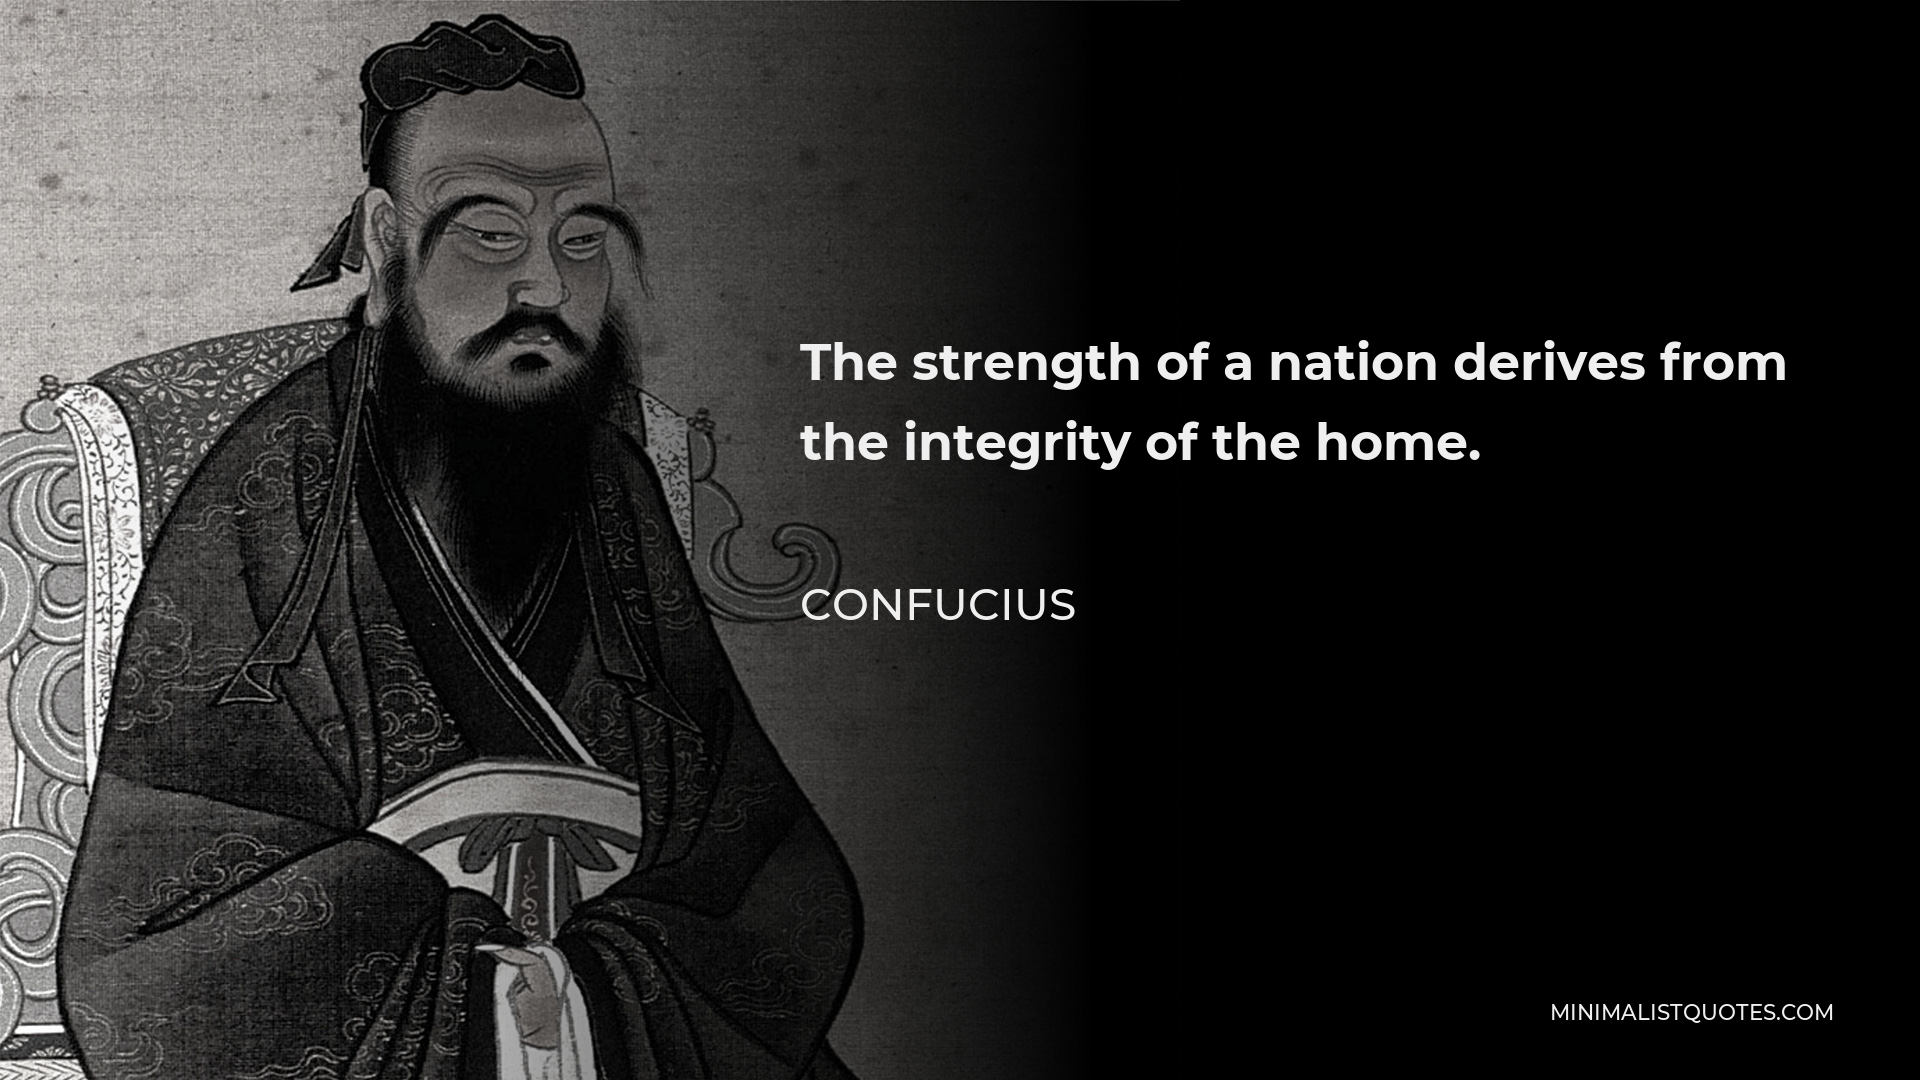 Confucius Quote - The strength of a nation derives from the integrity of the home.